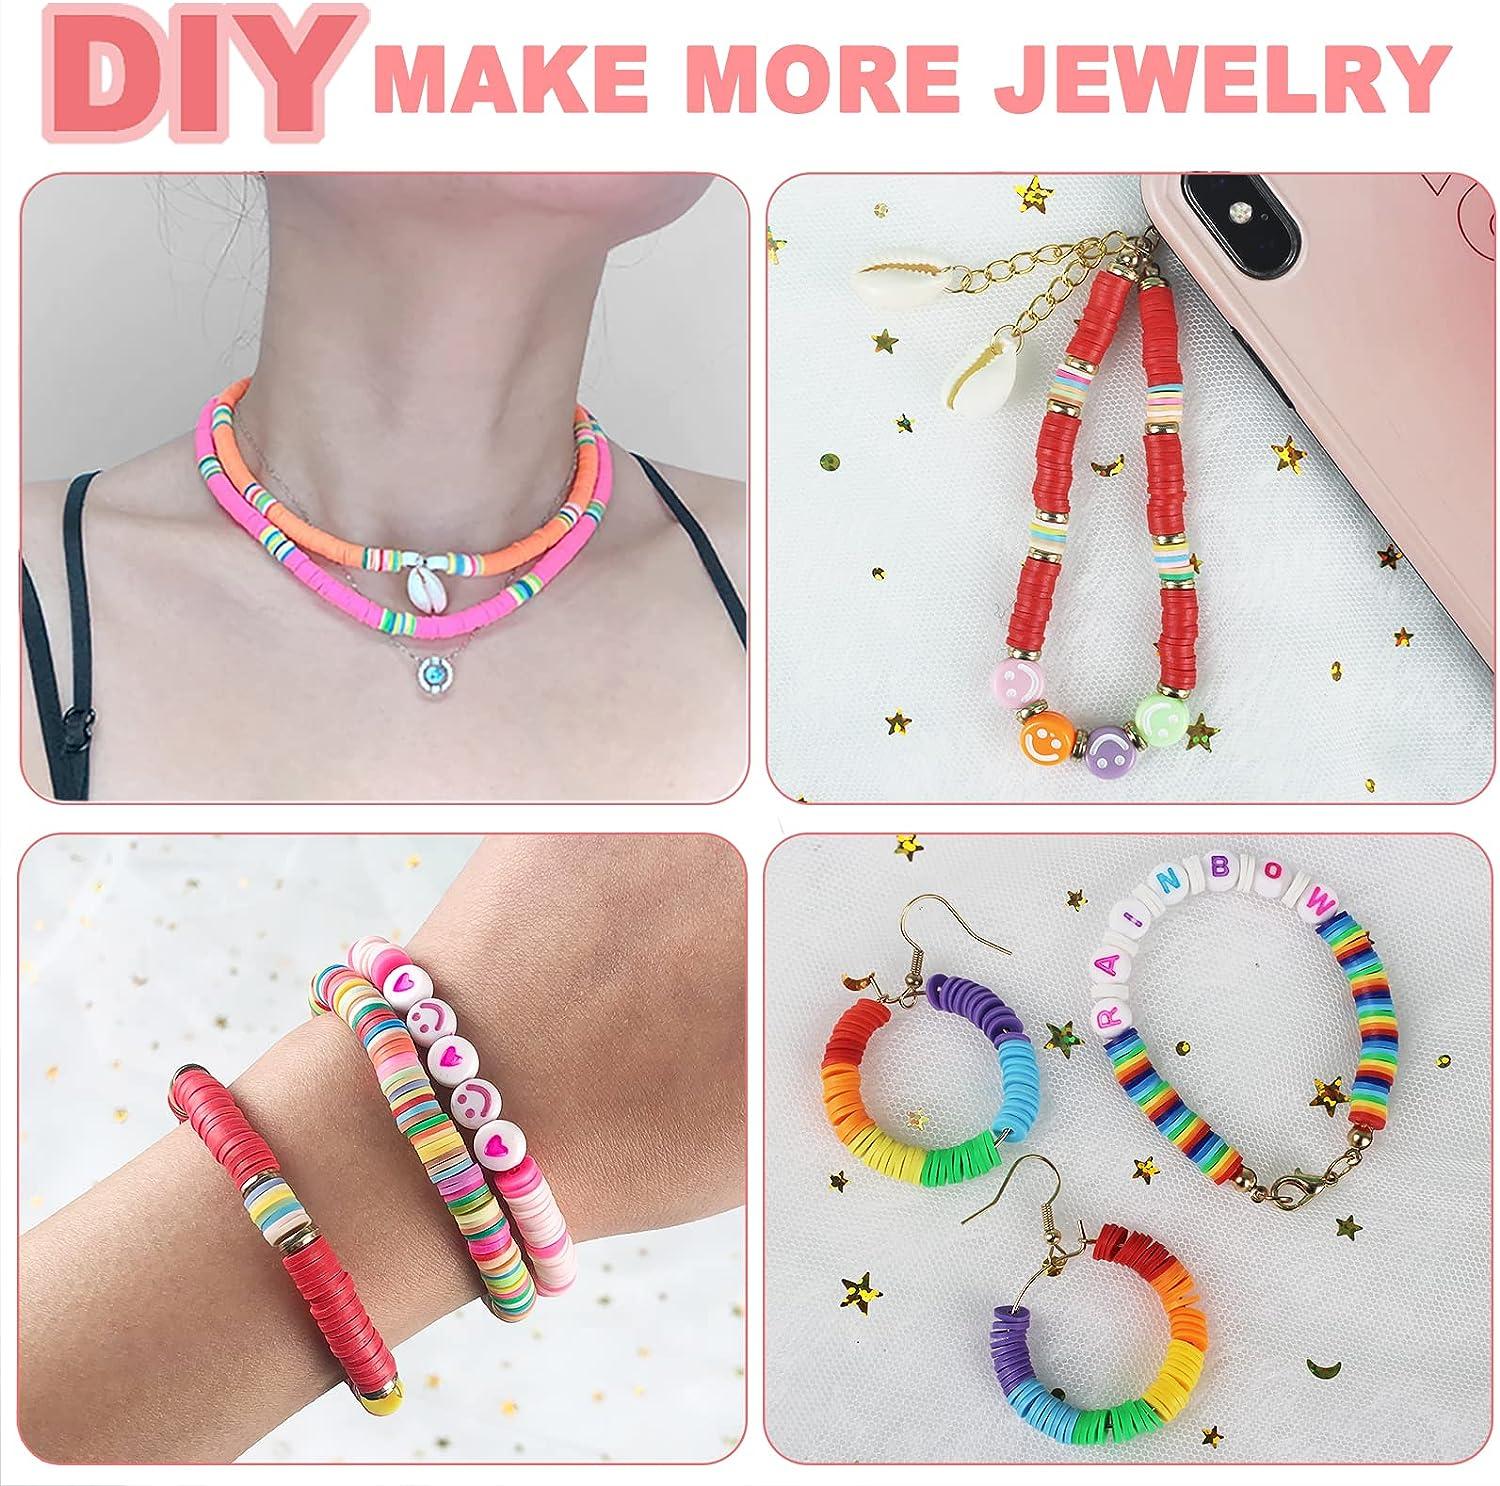 Bead Bracelet Making Kit From Polymer Clay Bead, DIY Necklace, Bracelet and  Jewelry Projects. High Quality Heishi Beads -  Canada